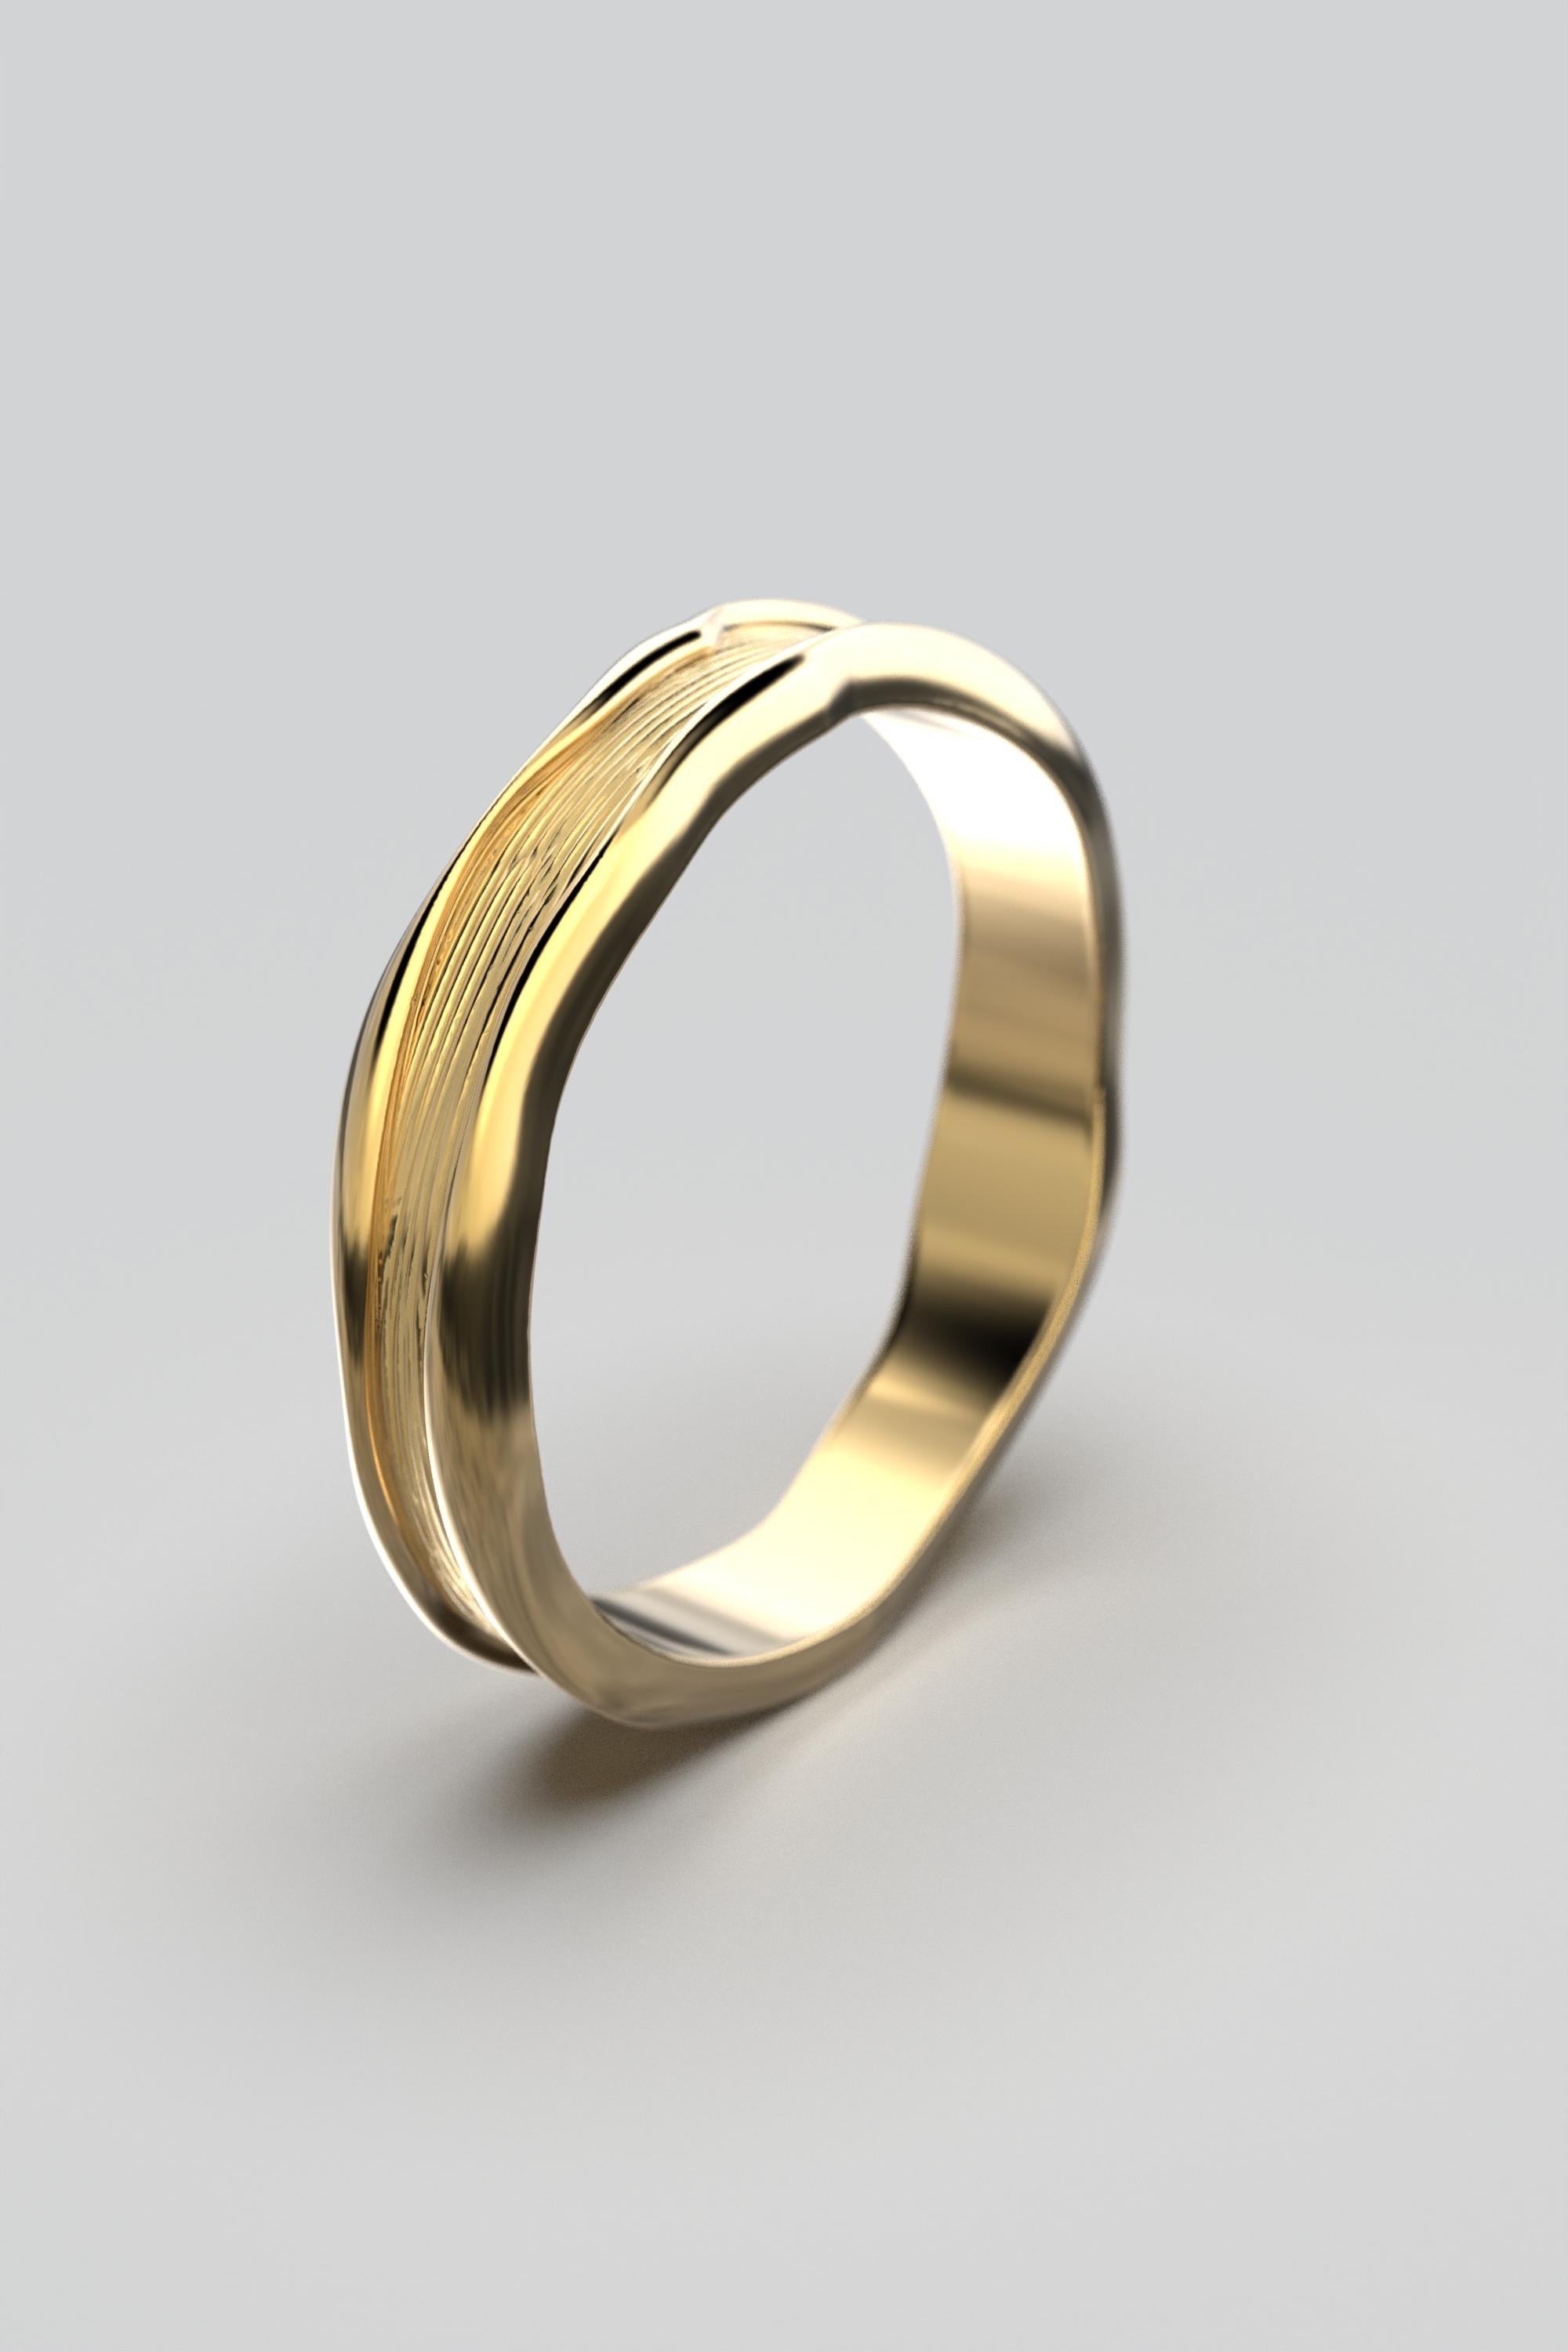 For Sale:  Florentine Finish Sophisticated Gold Wedding Band in 18k Made in Italy 2